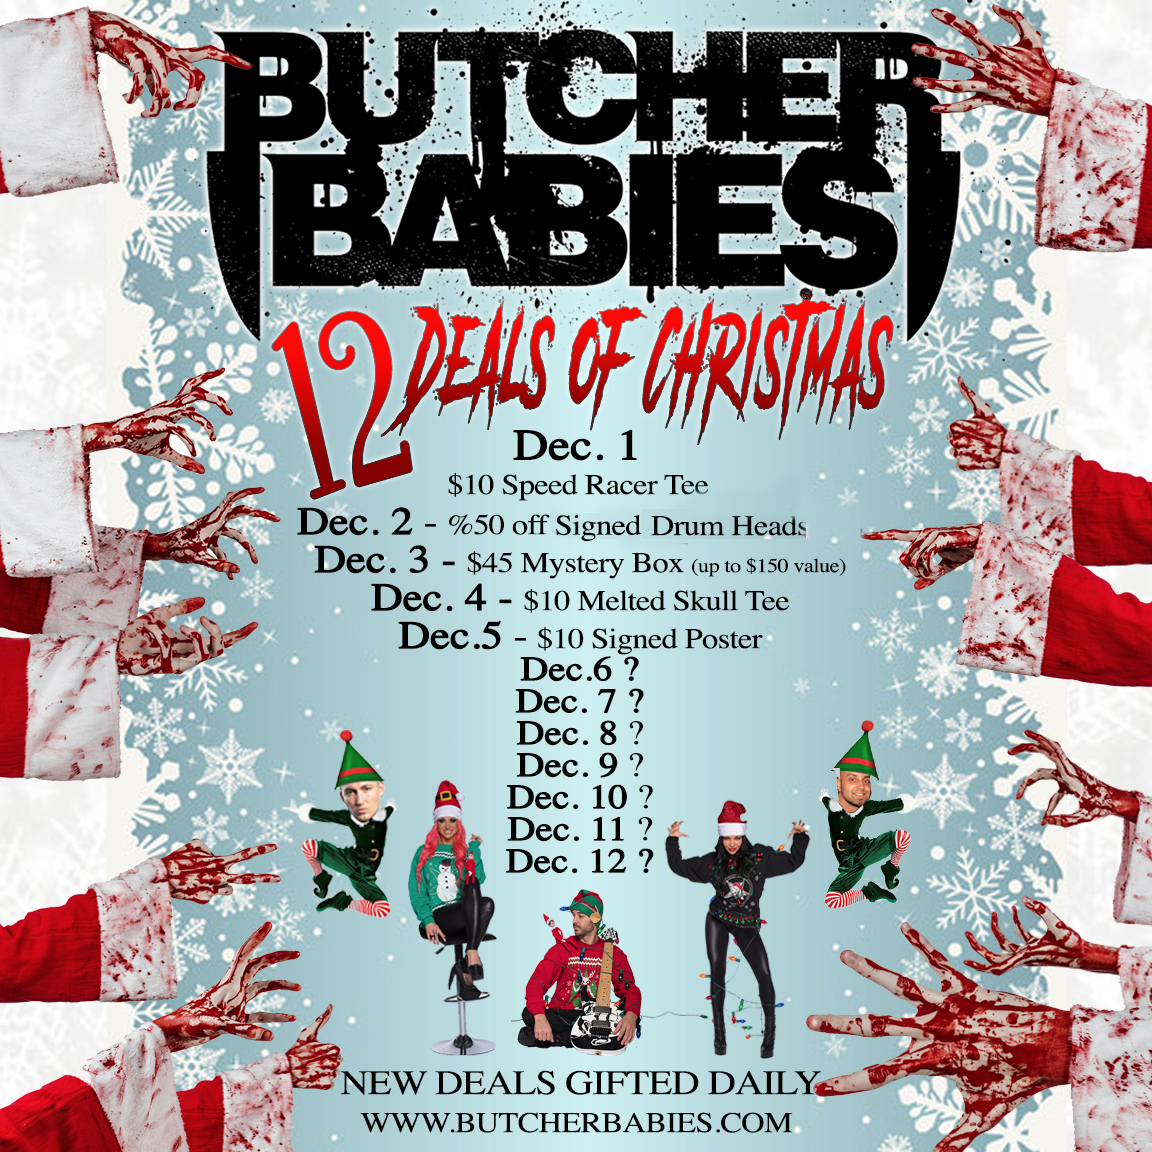 On the 3rd Day of Christmas my Butcher Babies gave to me... $45 Mystery Box worth up to $150. butcherbabiesmerch.com/product/myster… Could contain: T-shirts, Posters, Memorabilia, Handwritten Lyrics, Music Video gear, etc. So many possibilities. Check in everyday for more deals!